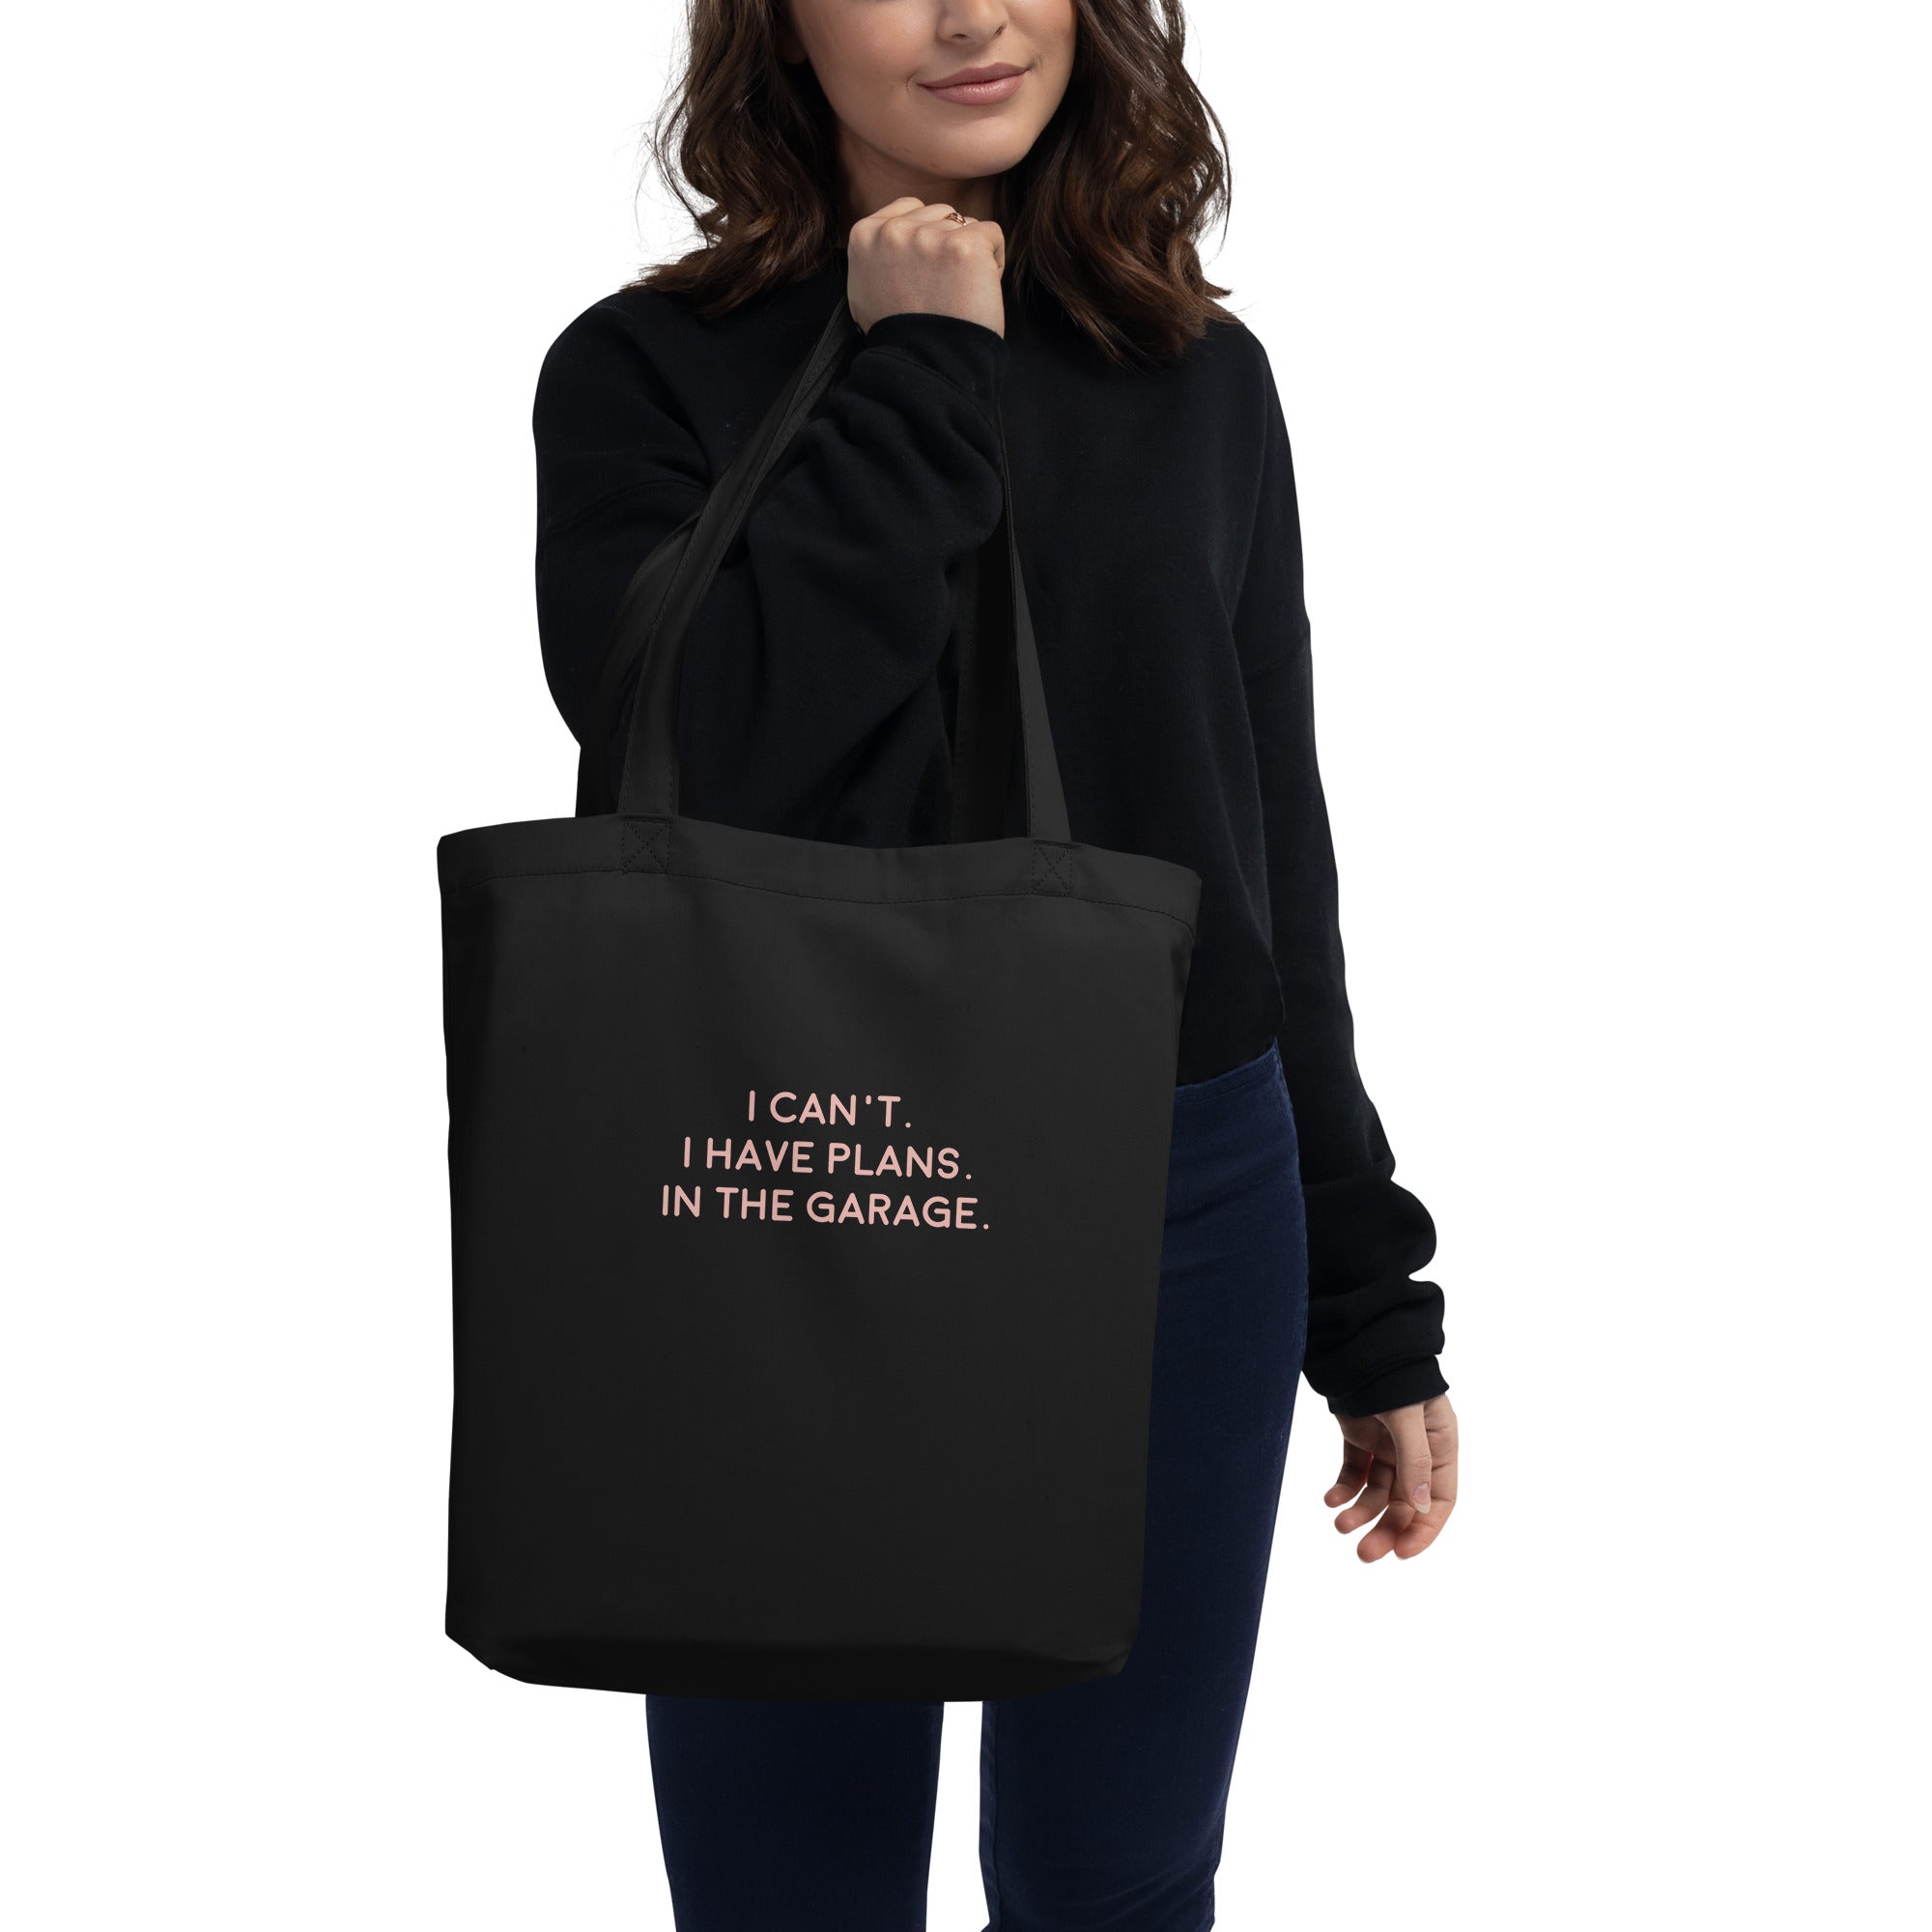 I Have Plans Eco Tote Bag